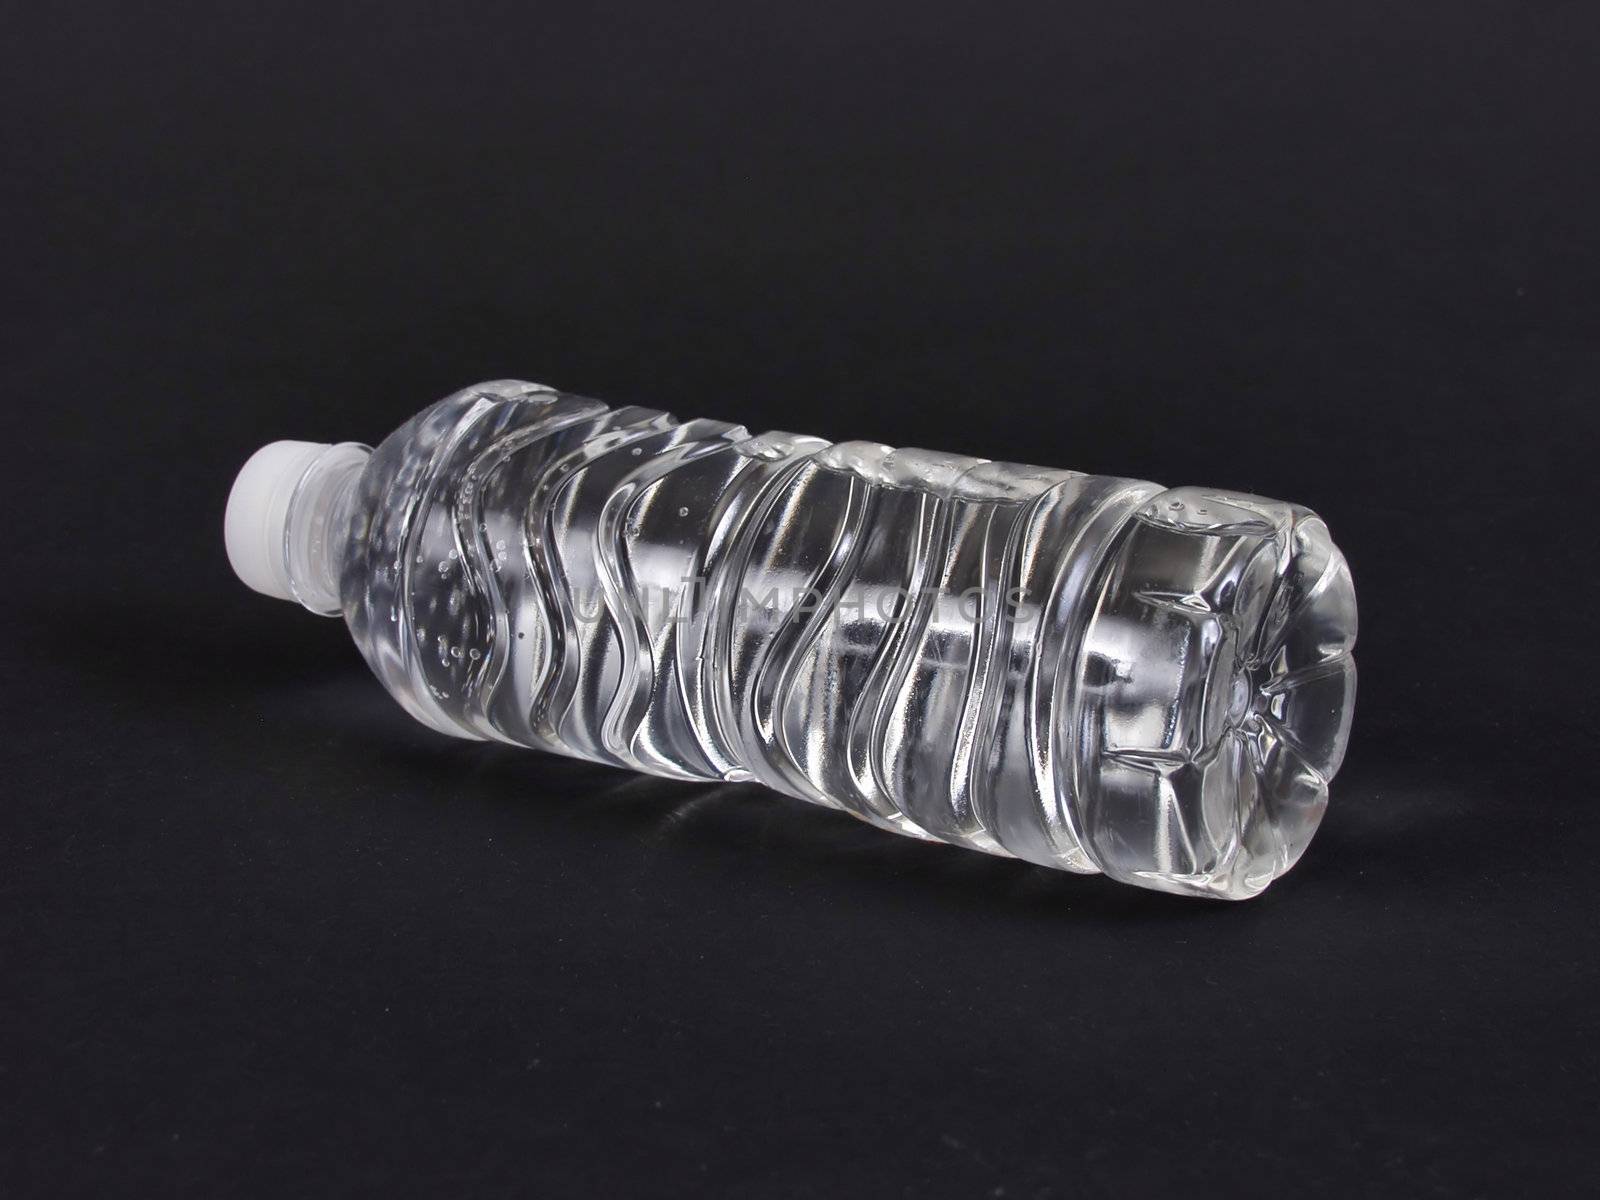 A full clear plastic water bottle laying on its side. Over a black background.